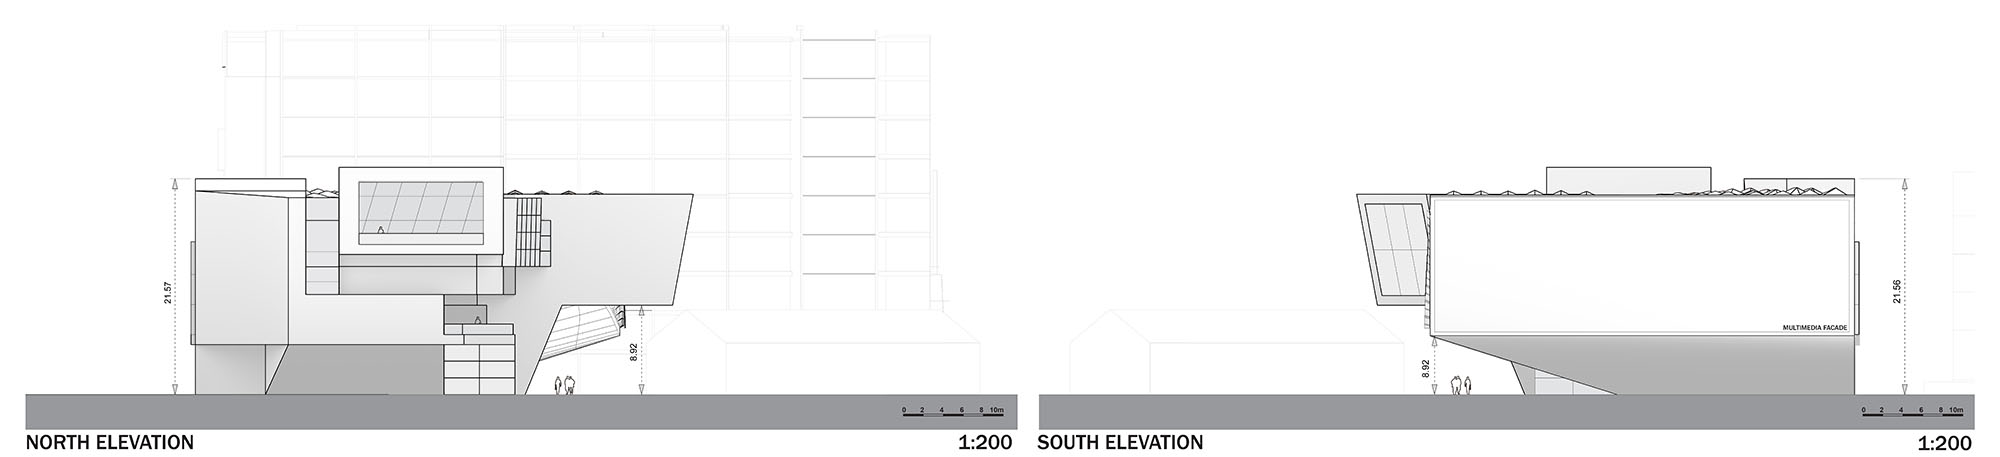 NLH_Elevation_02_North_South